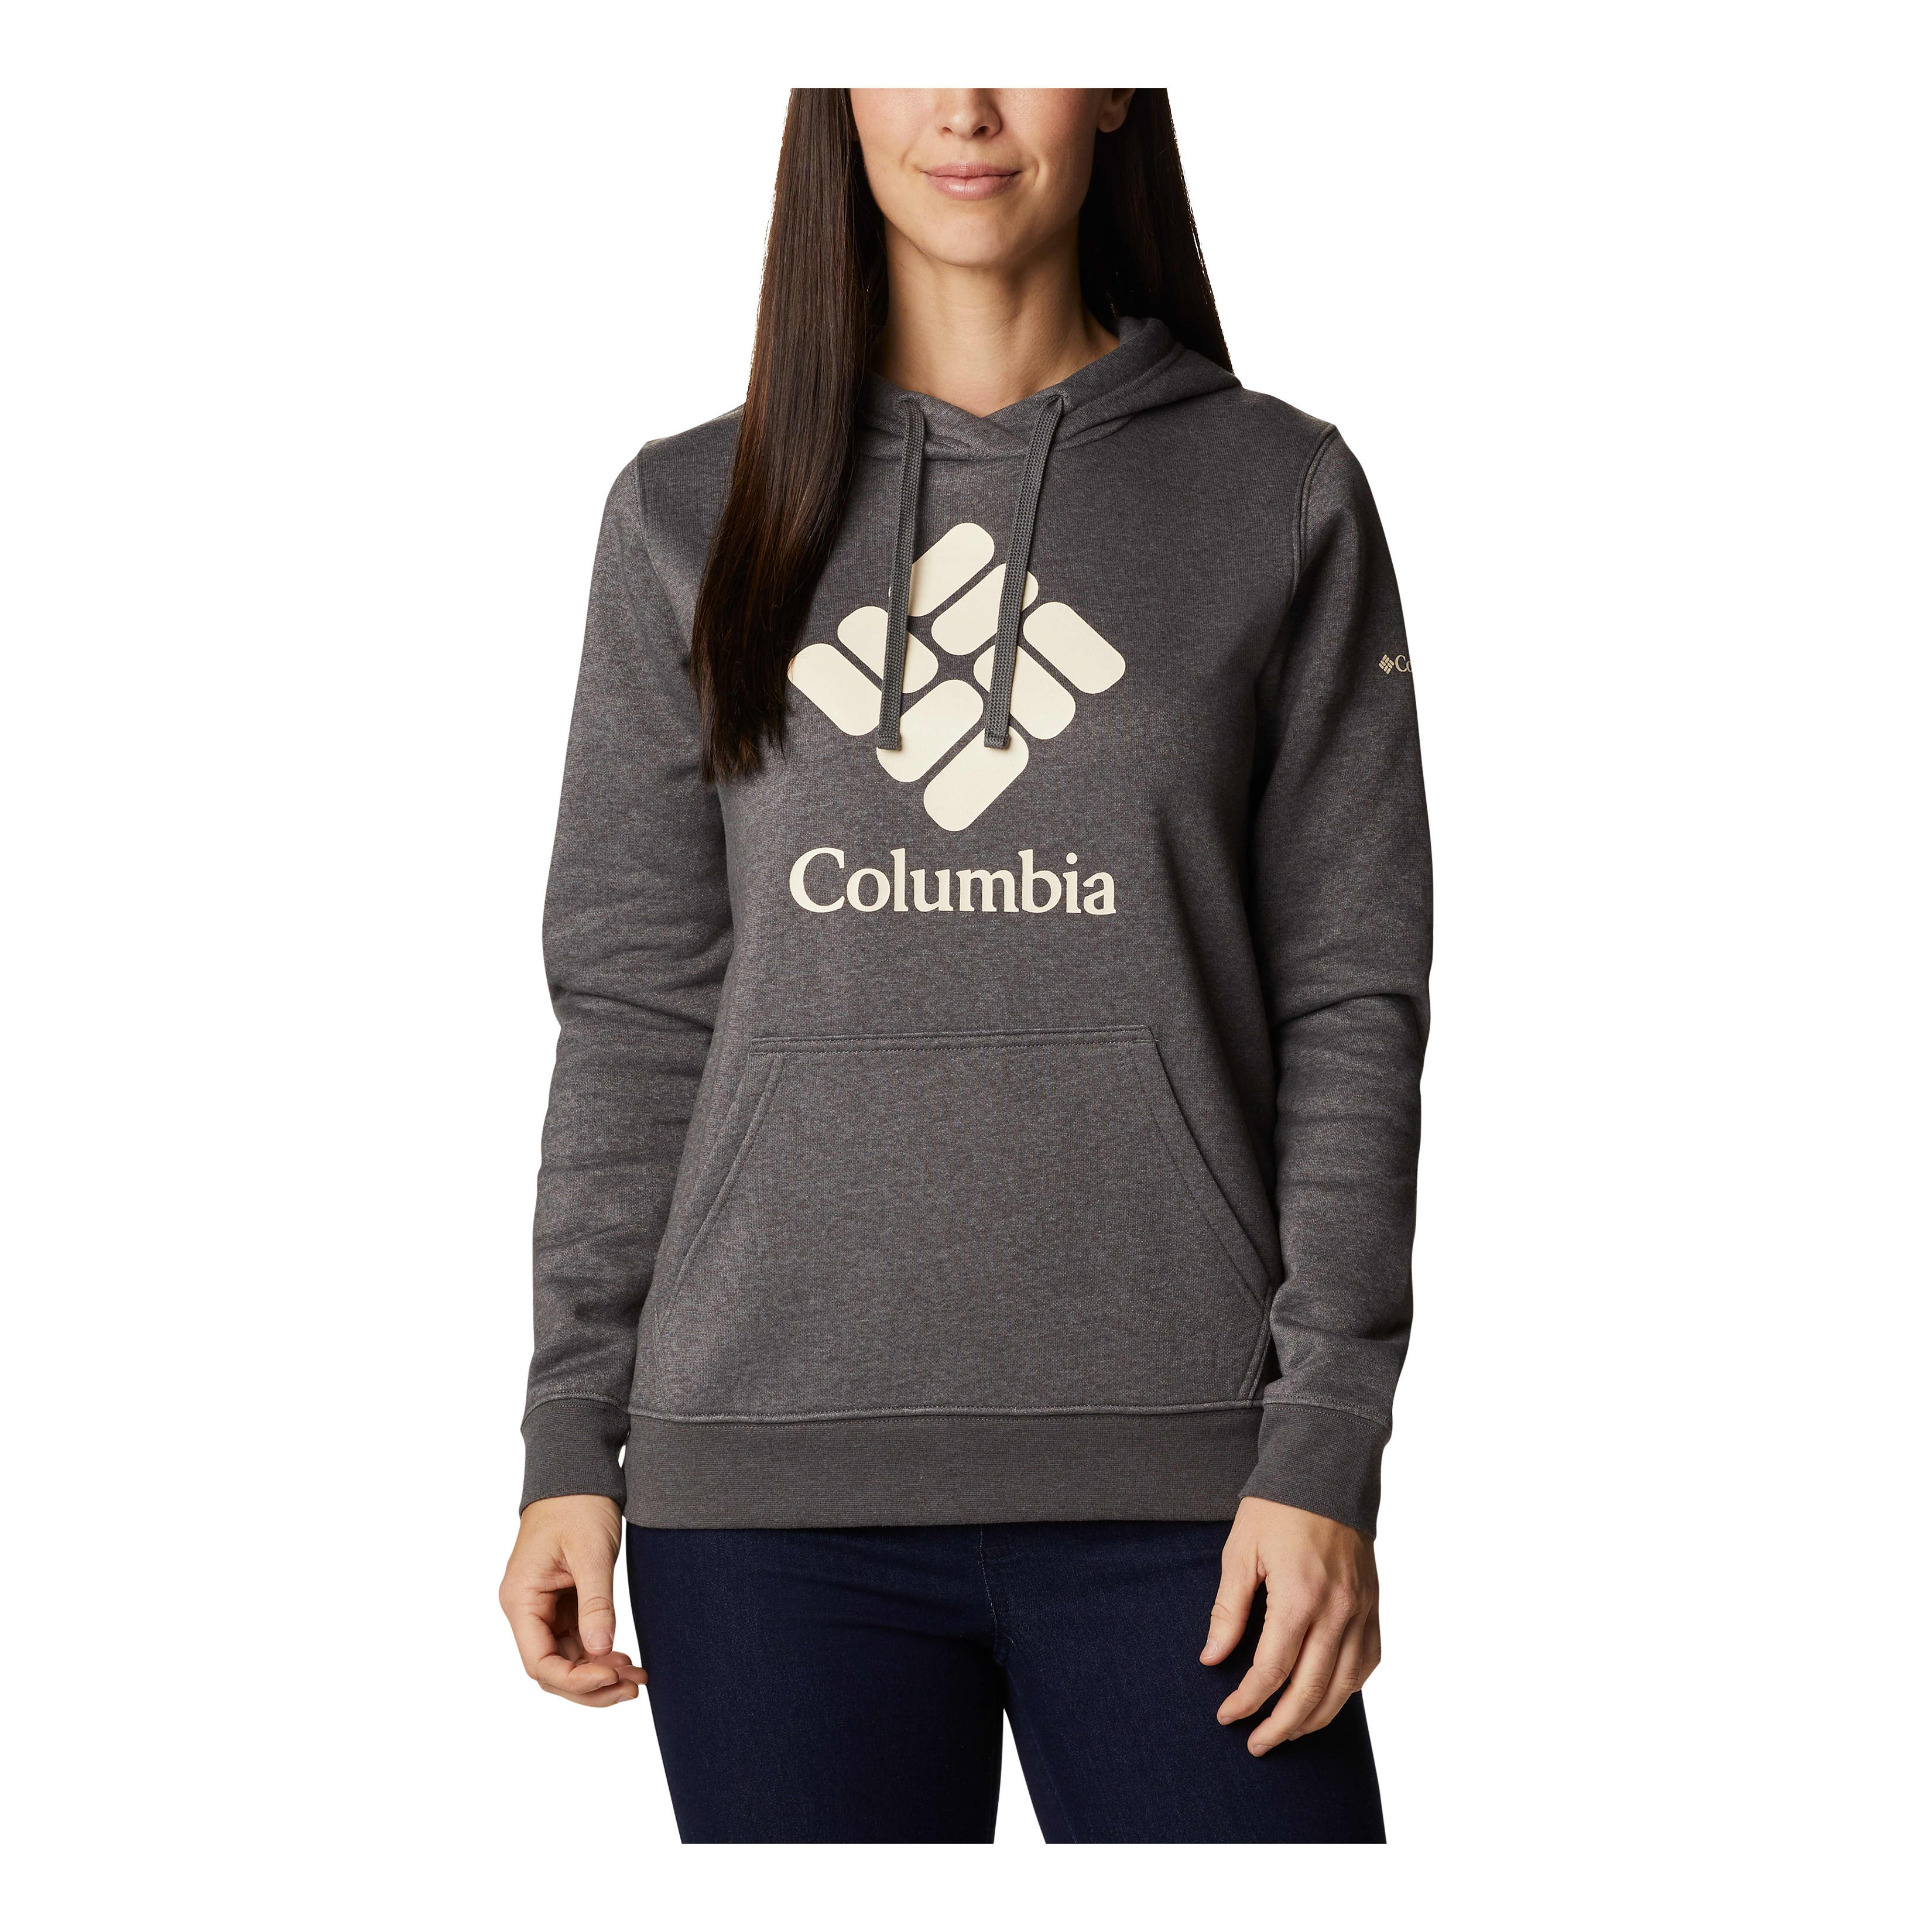 Cabela's Hoodies Only $10 + FREE Shipping – Men, Women and Kids